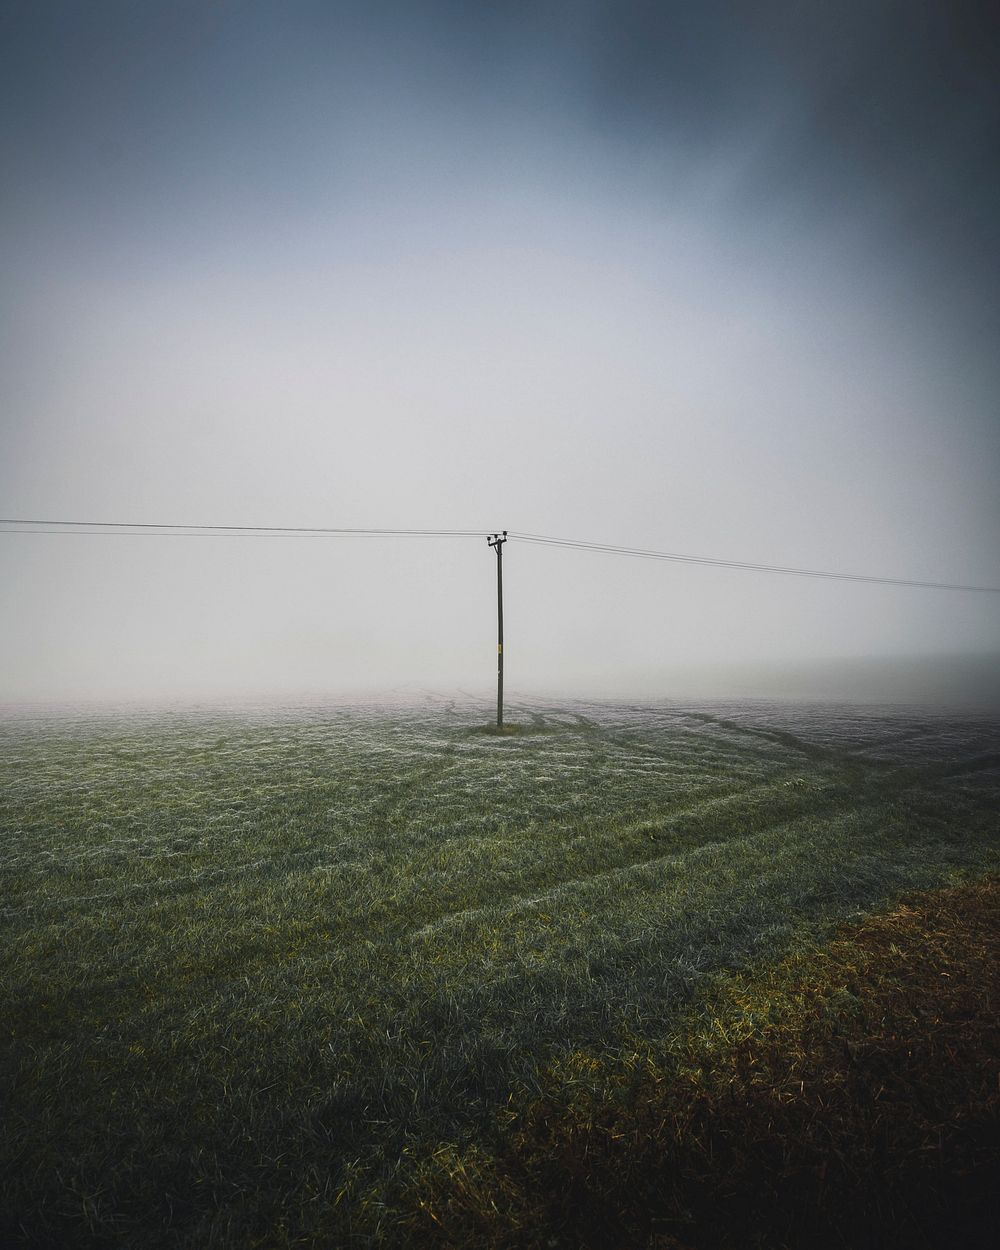 Frosty field with electric pole in a misty day